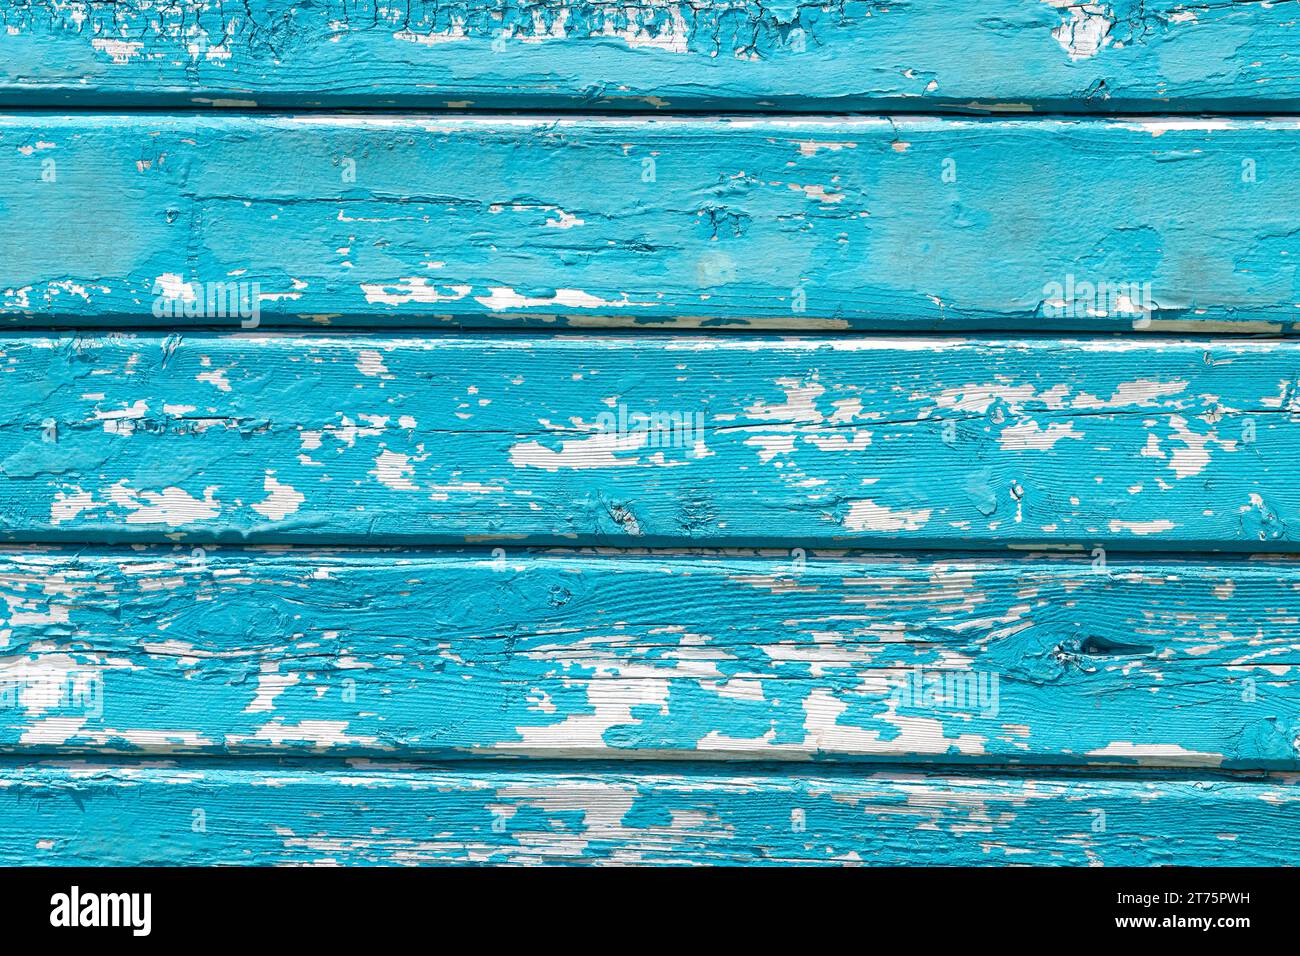 Weathered wooden wall, cracking paint with teal blue and turquoise colors, rustic, backgrounds, backdrop, textures Stock Photo